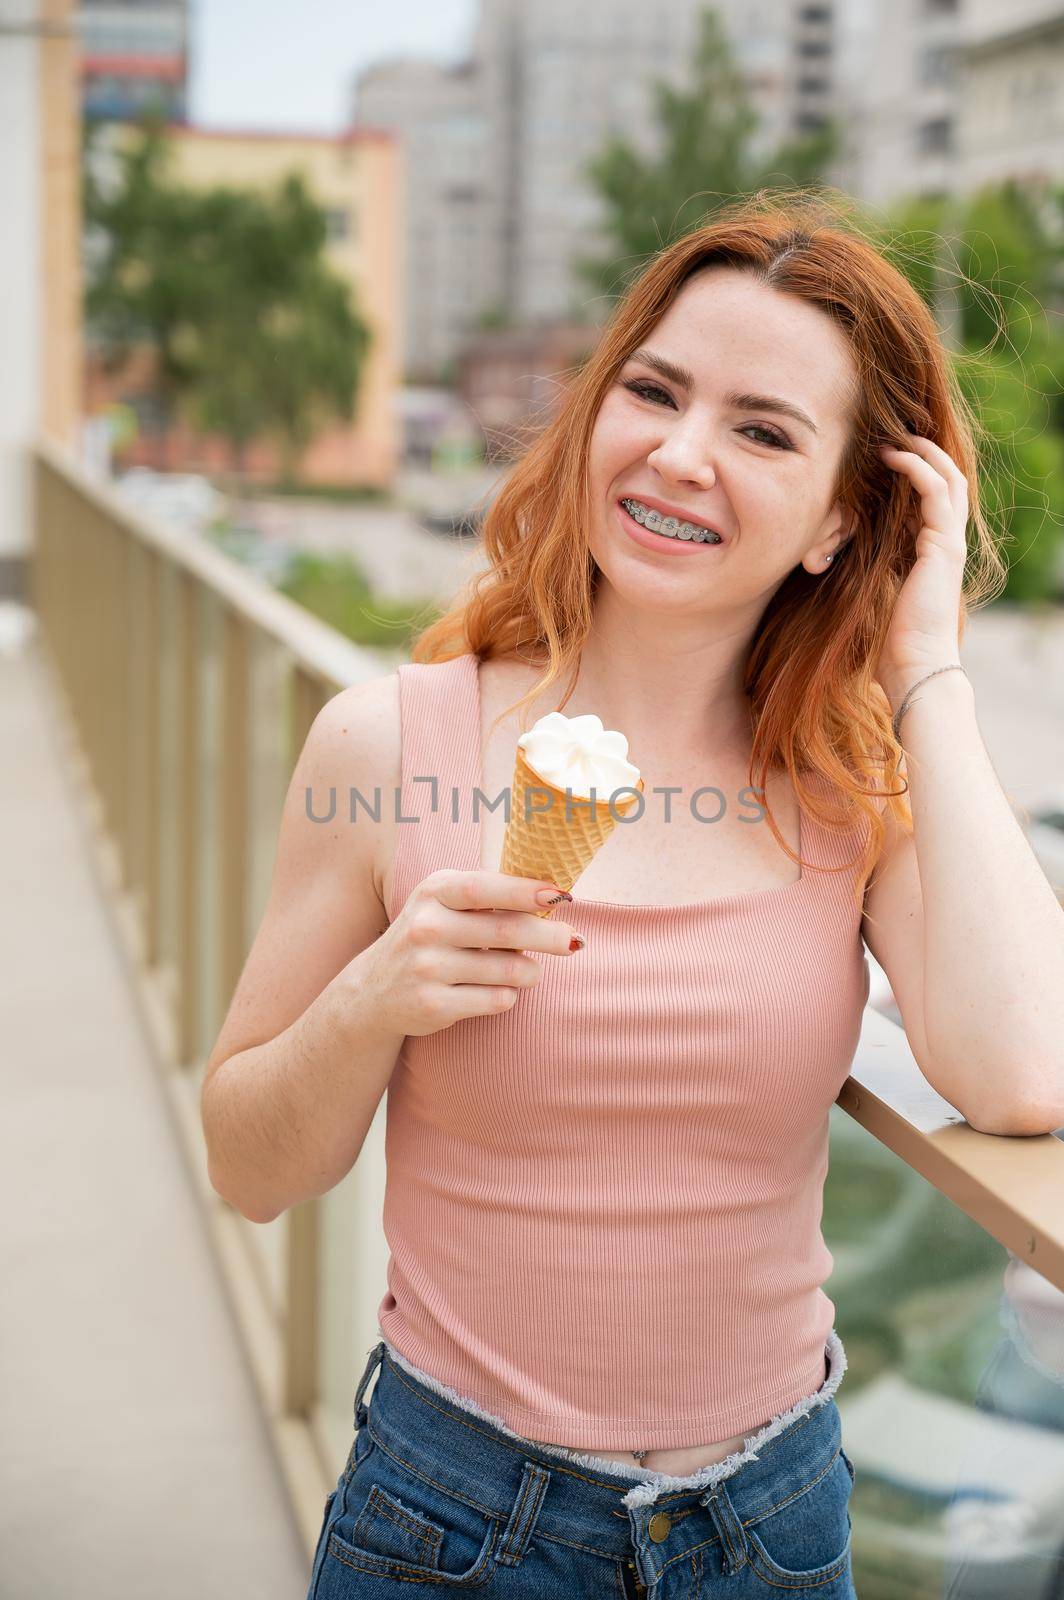 Portrait of young beautiful red-haired woman smiling with braces and going to eat ice cream cone outdoors in summer.